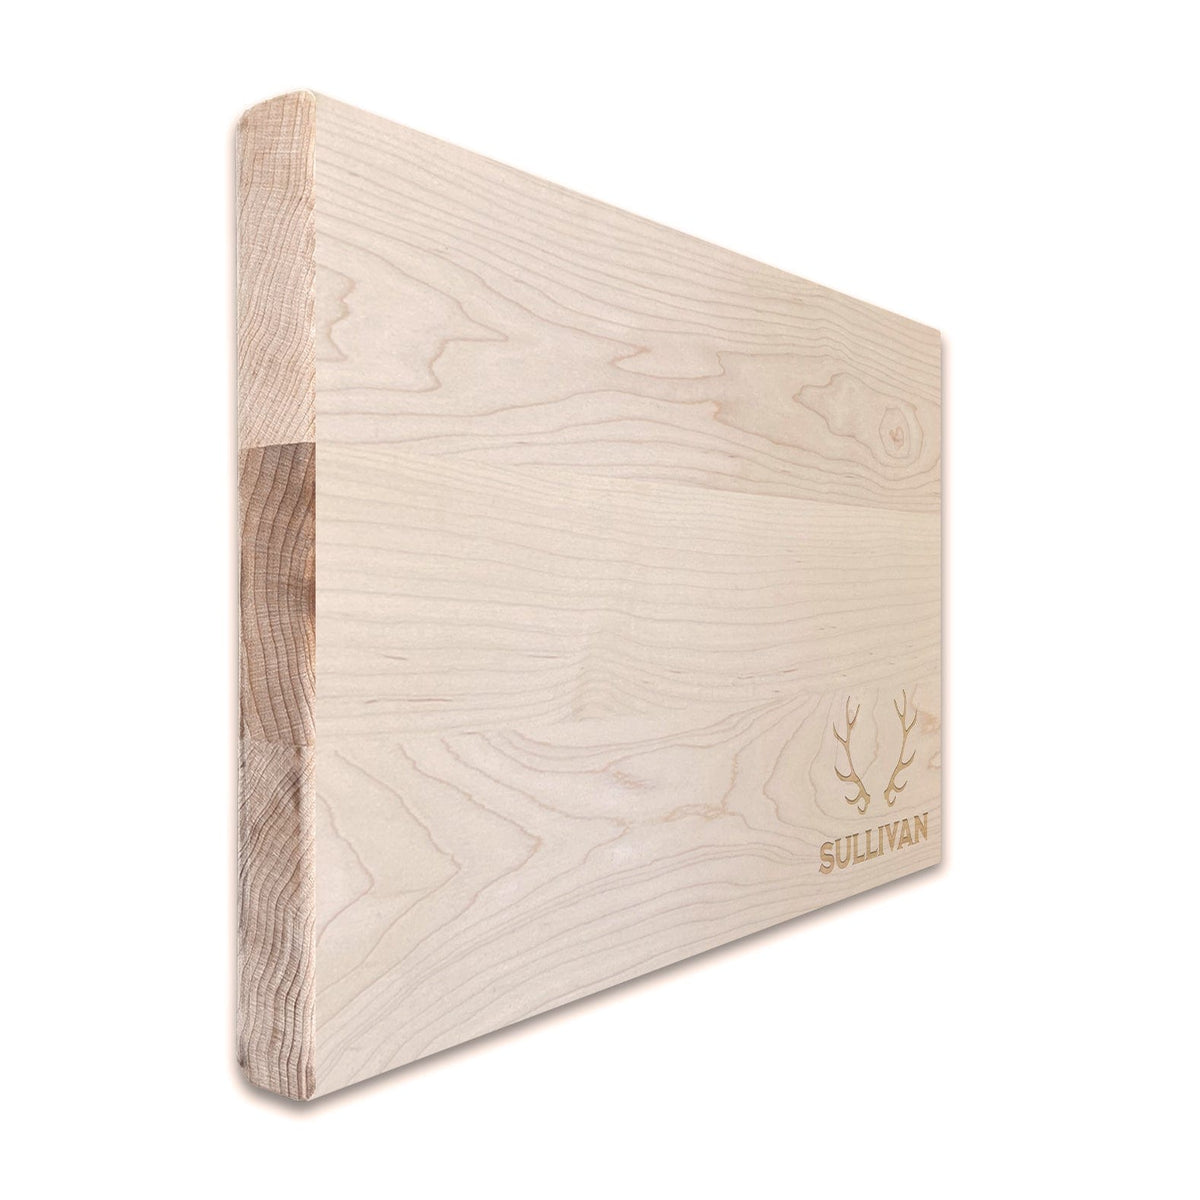 Personalized wood cutting board angled view